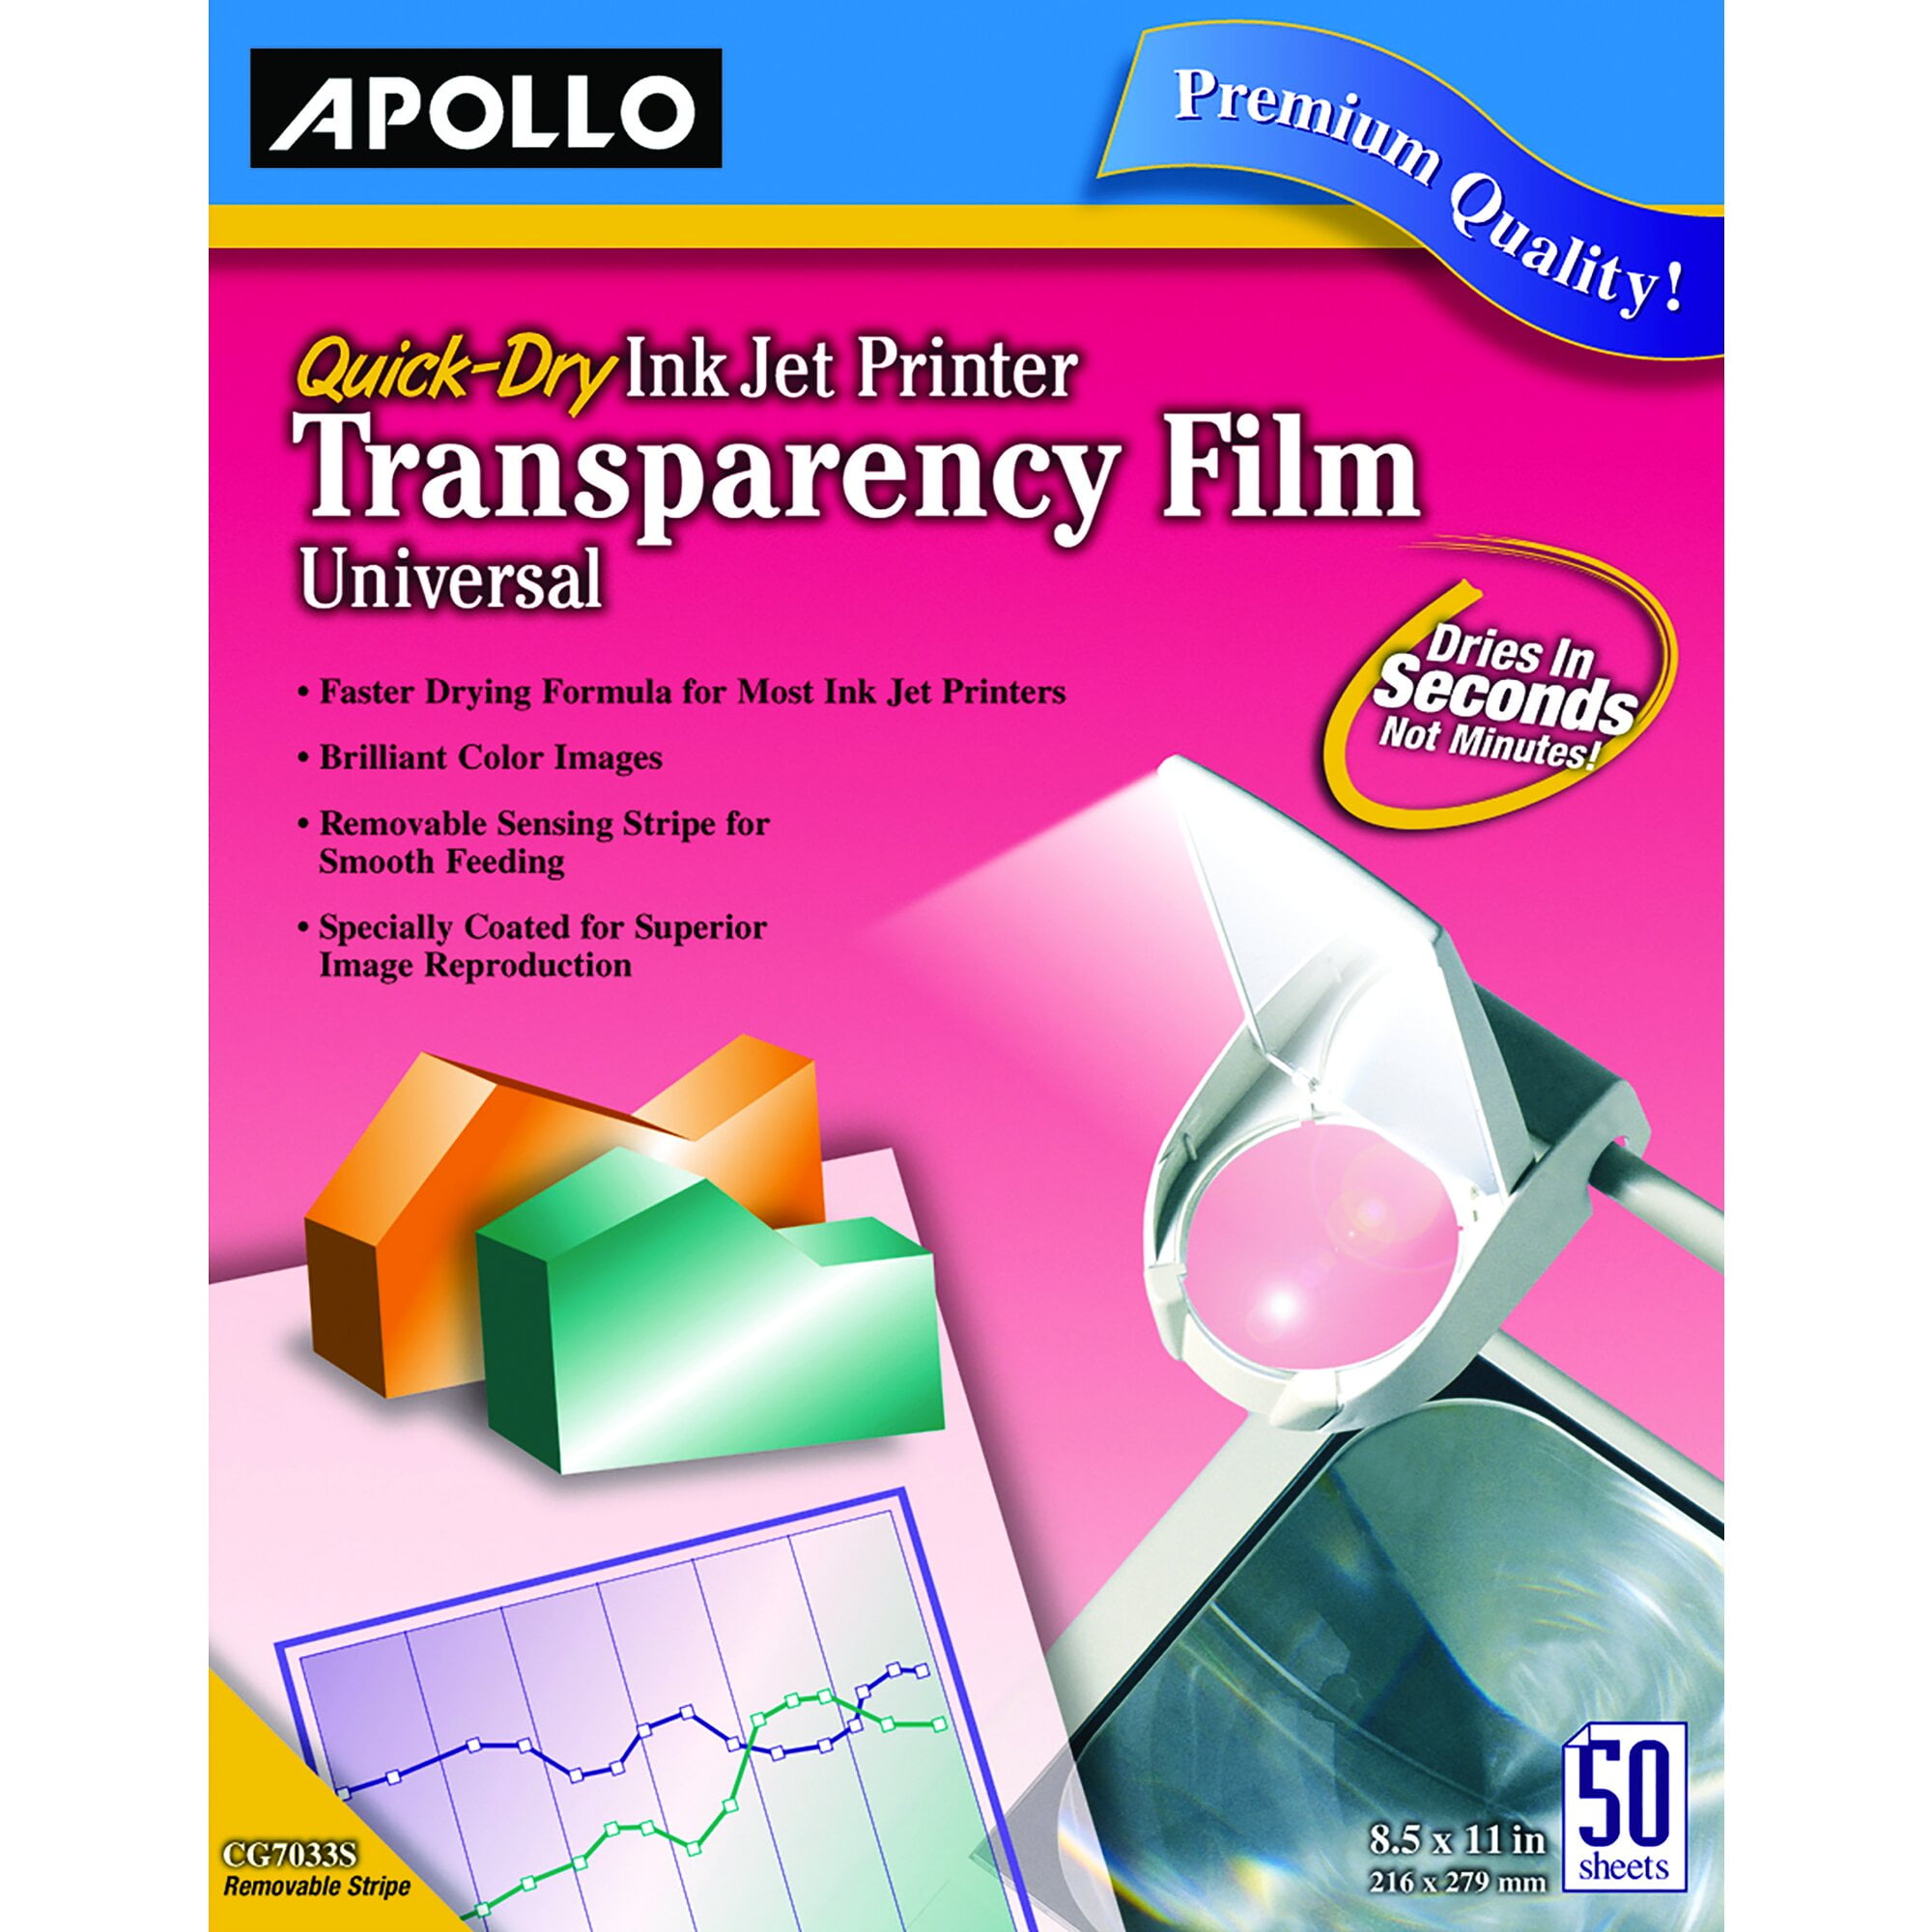 Apollo Transparency Film CG7060 for Laser Printers 50 Sheets for sale online 